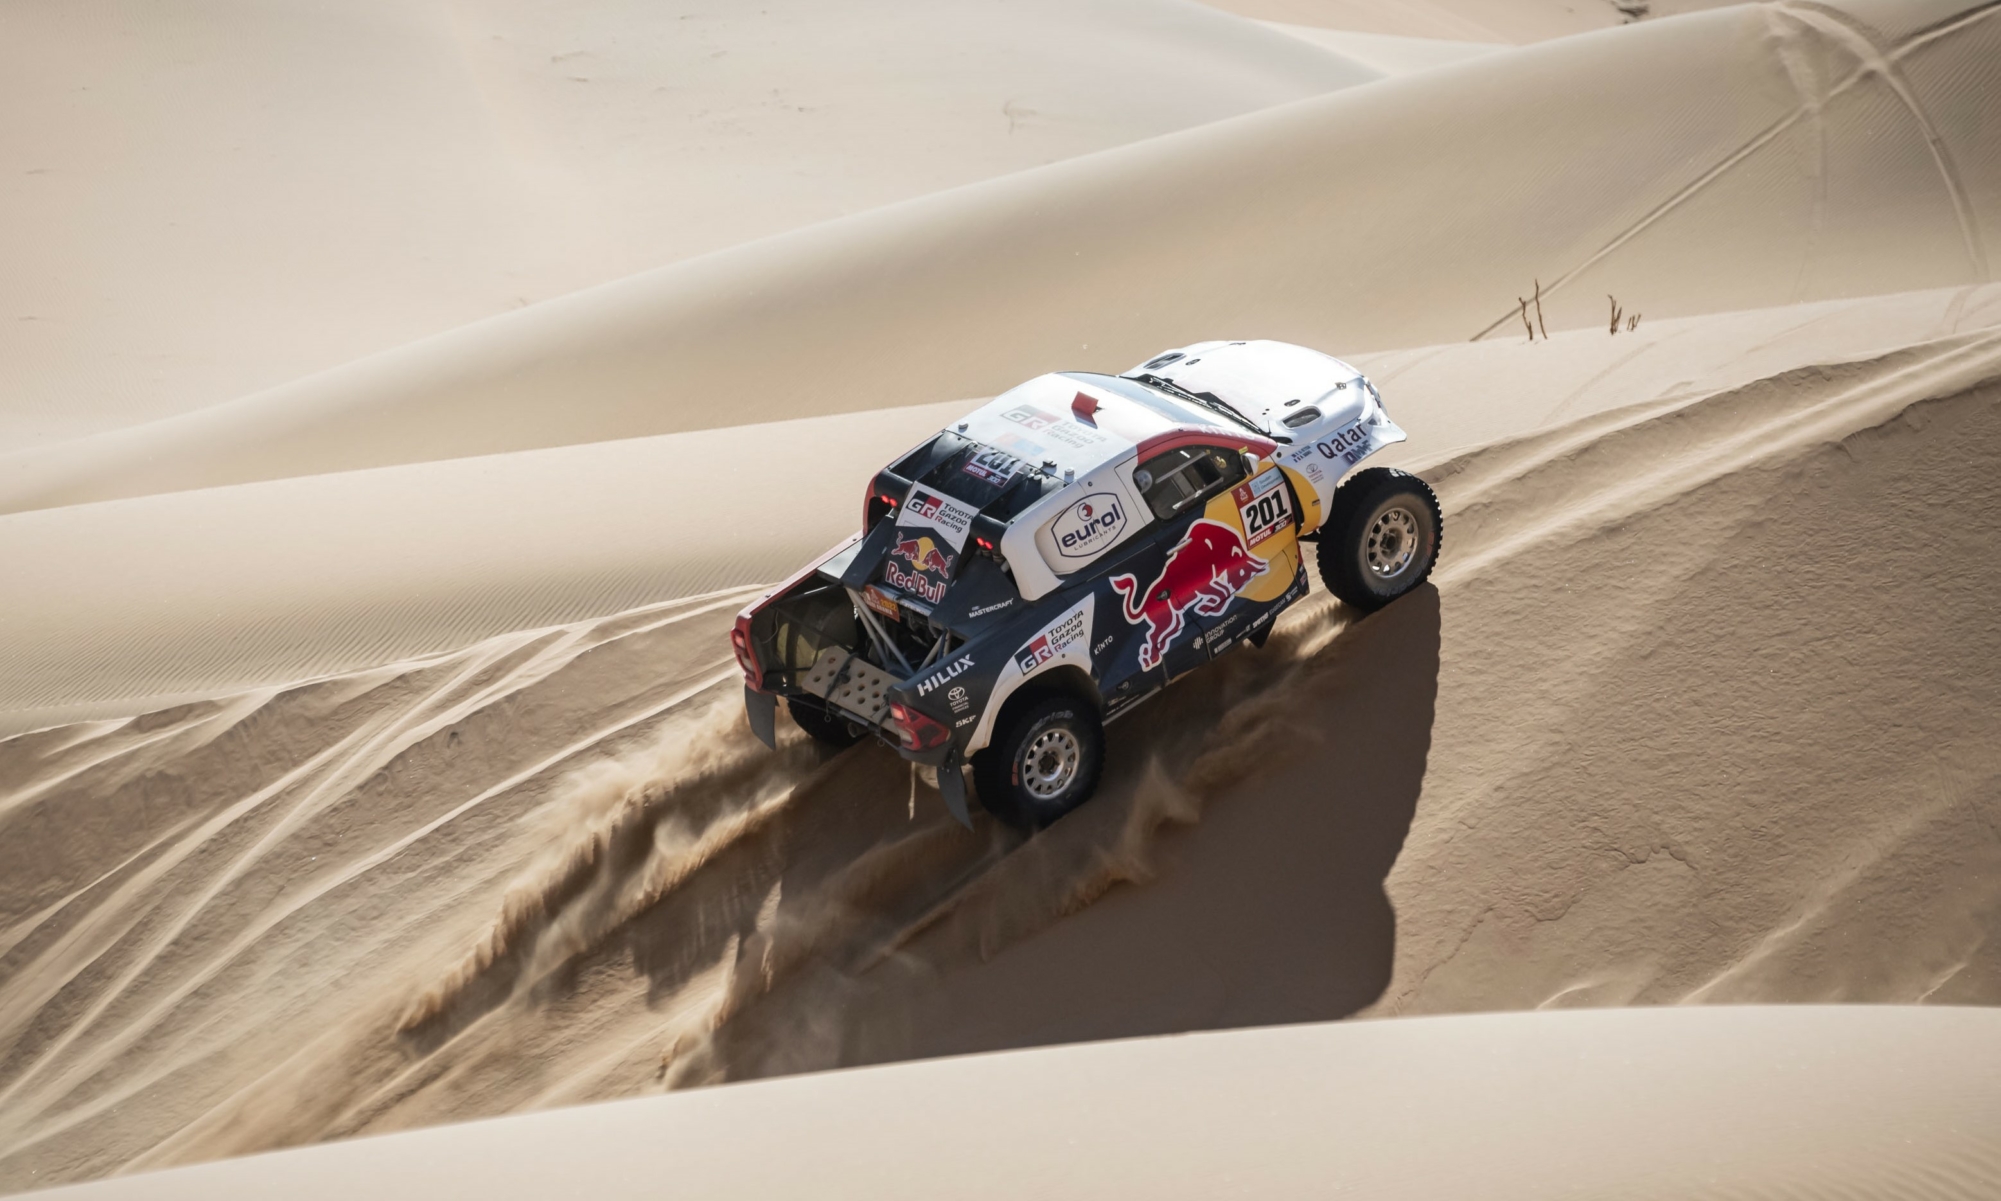 Nasser Al-Attiyah remains the overall leader ahead of the final stage to Riyadh.